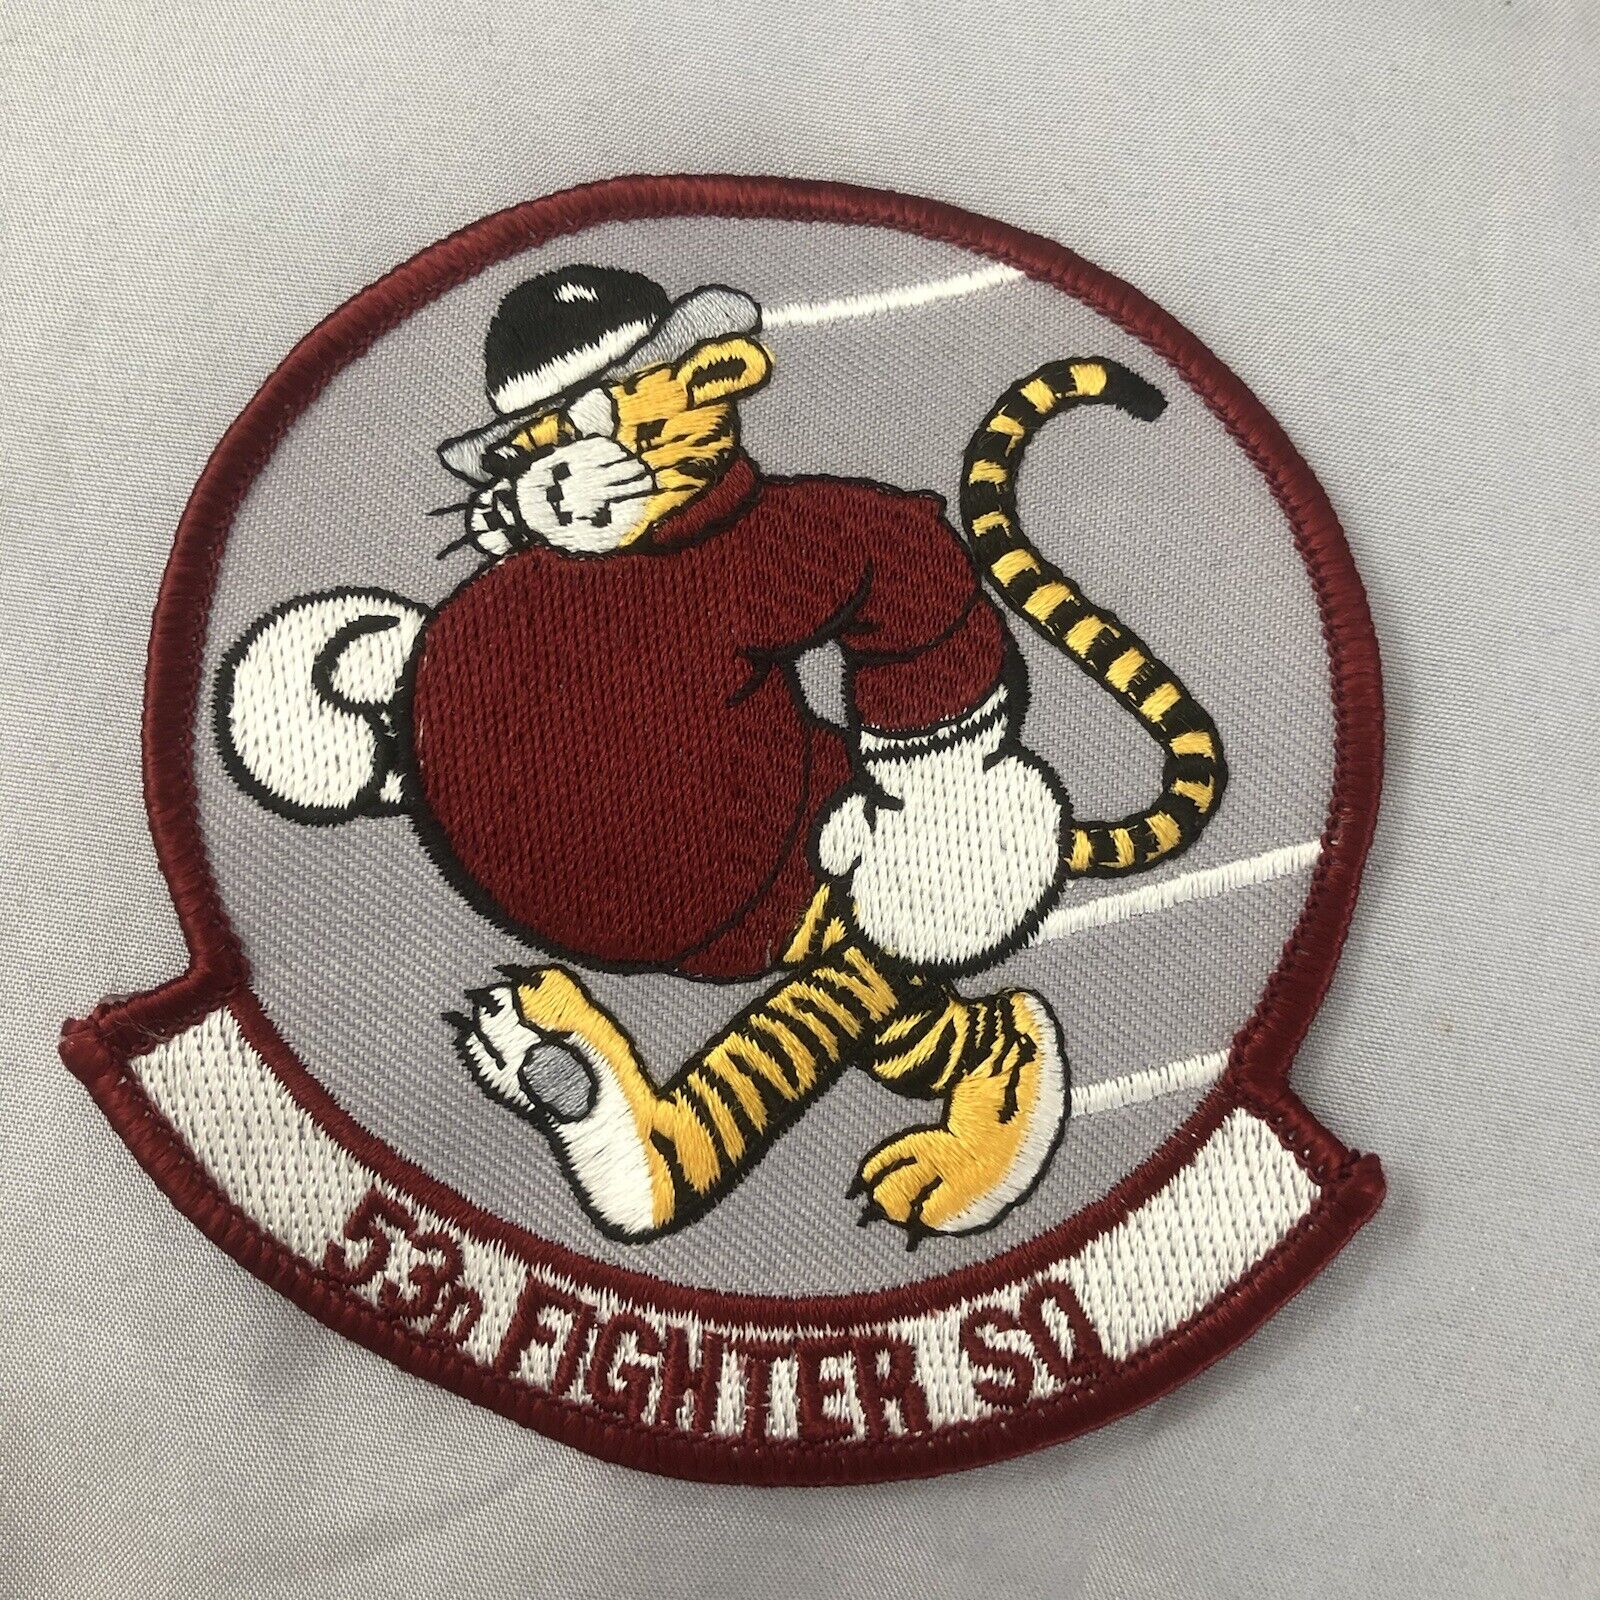 53D Fighter Sq Patch - 3 7/8 inches x 4 inches - United States Air Force